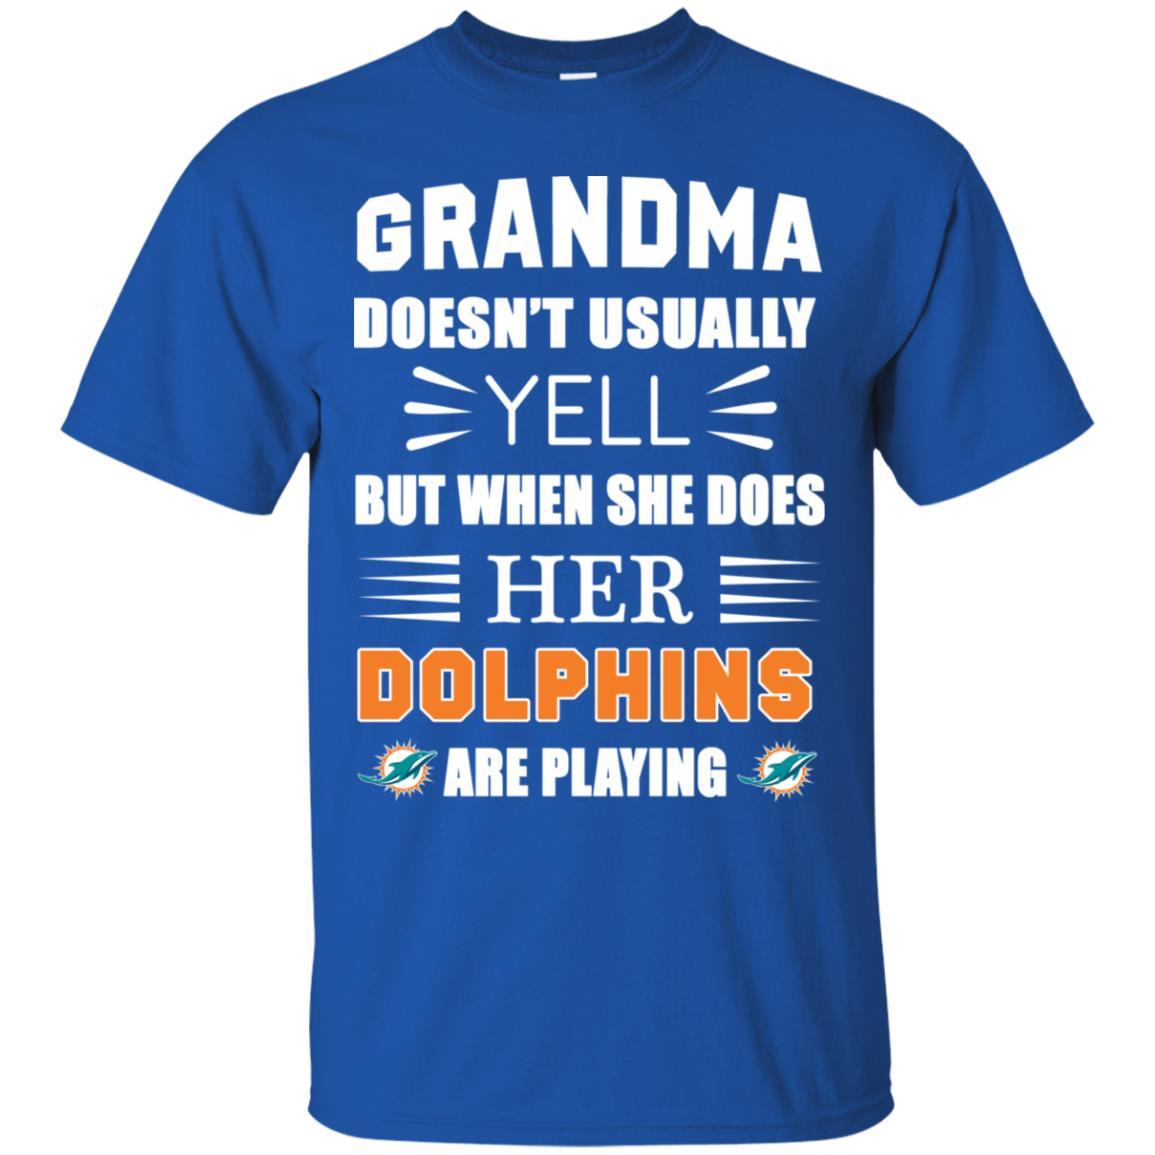 Miami Dolphins Shop - Cool Grandma Doesn't Usually Yell She Does Her Miami Dolphins T Shirts 1